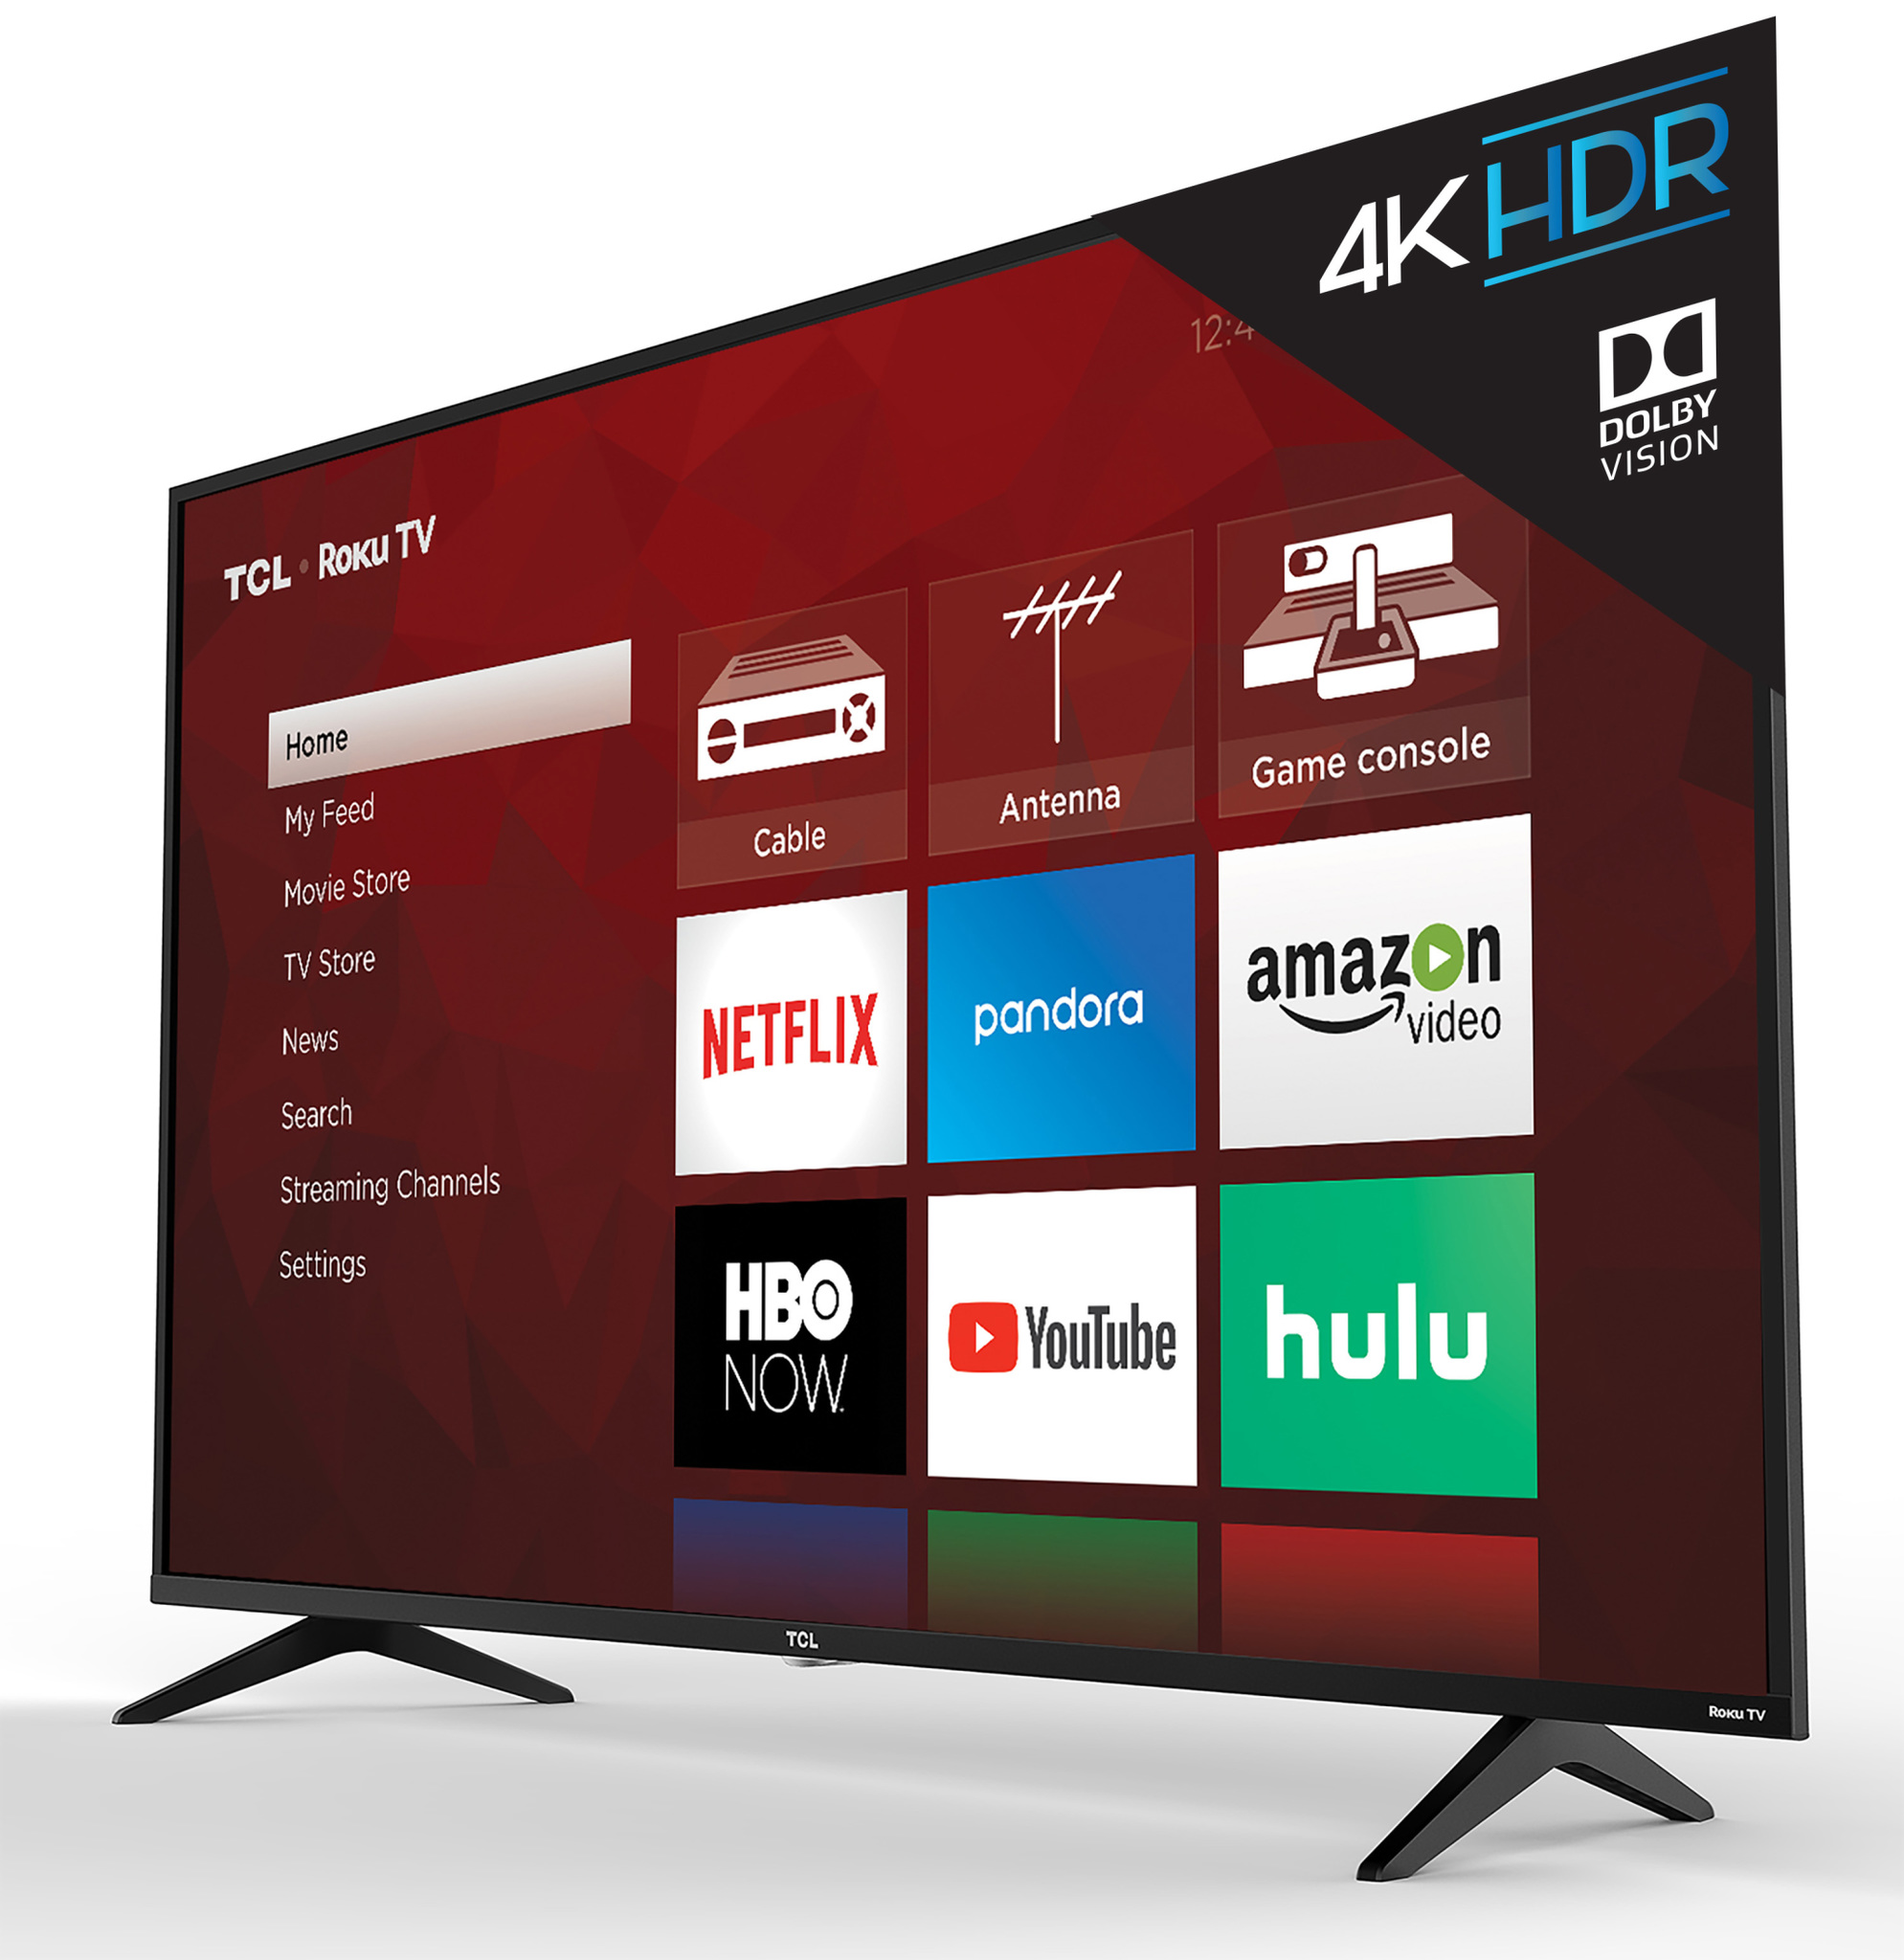 TCL’s New 2018 5-Series Roku TVs With 4K Dolby Vision HDR Are Now On Sale